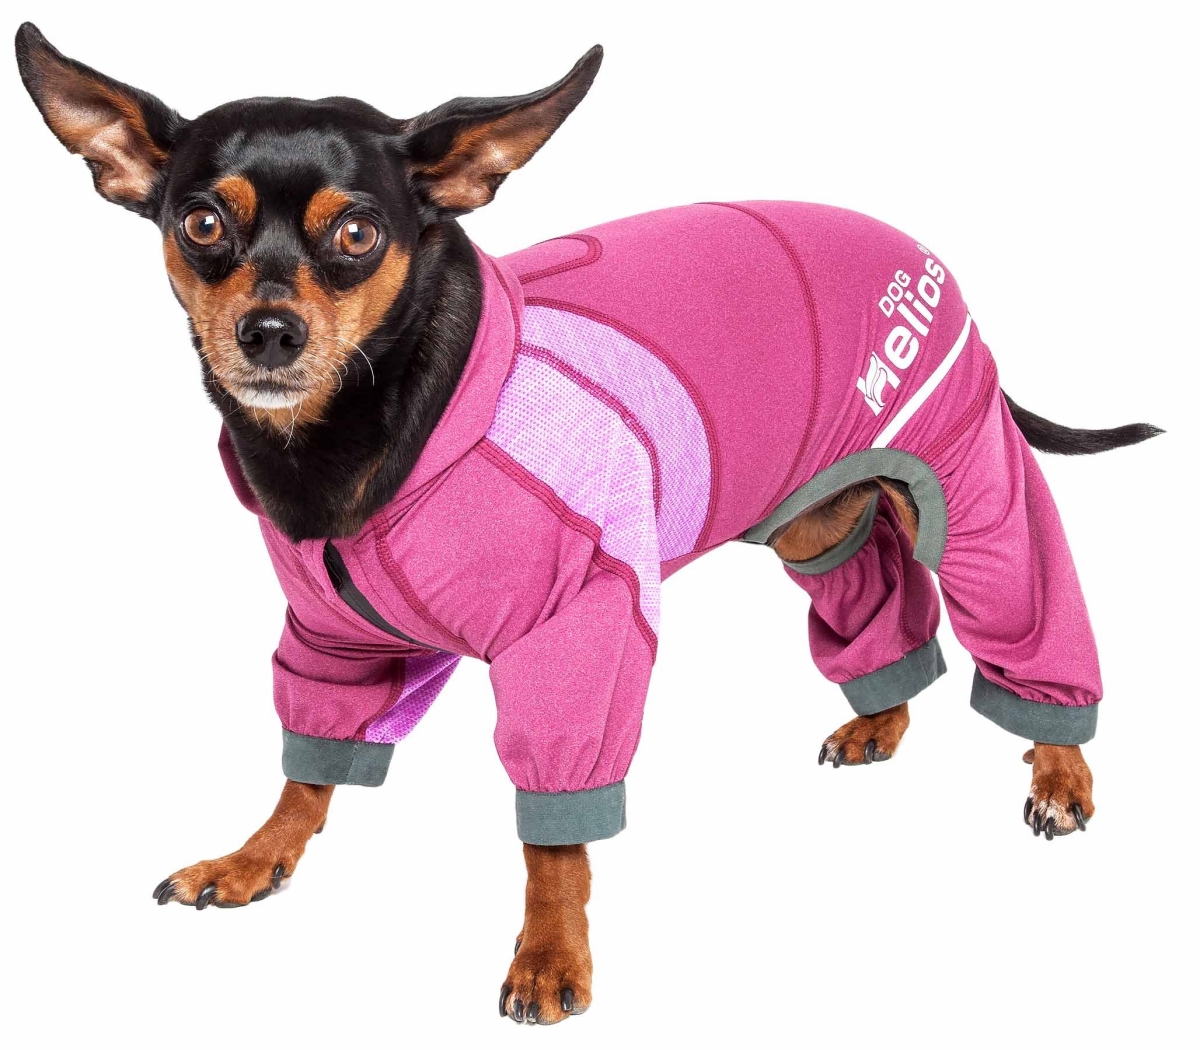 Yghl7pksm Namastail 4-way Stretch Breathable Full Bodied Performance Yoga Dog Hoodie Tracksuit - Pink, Small